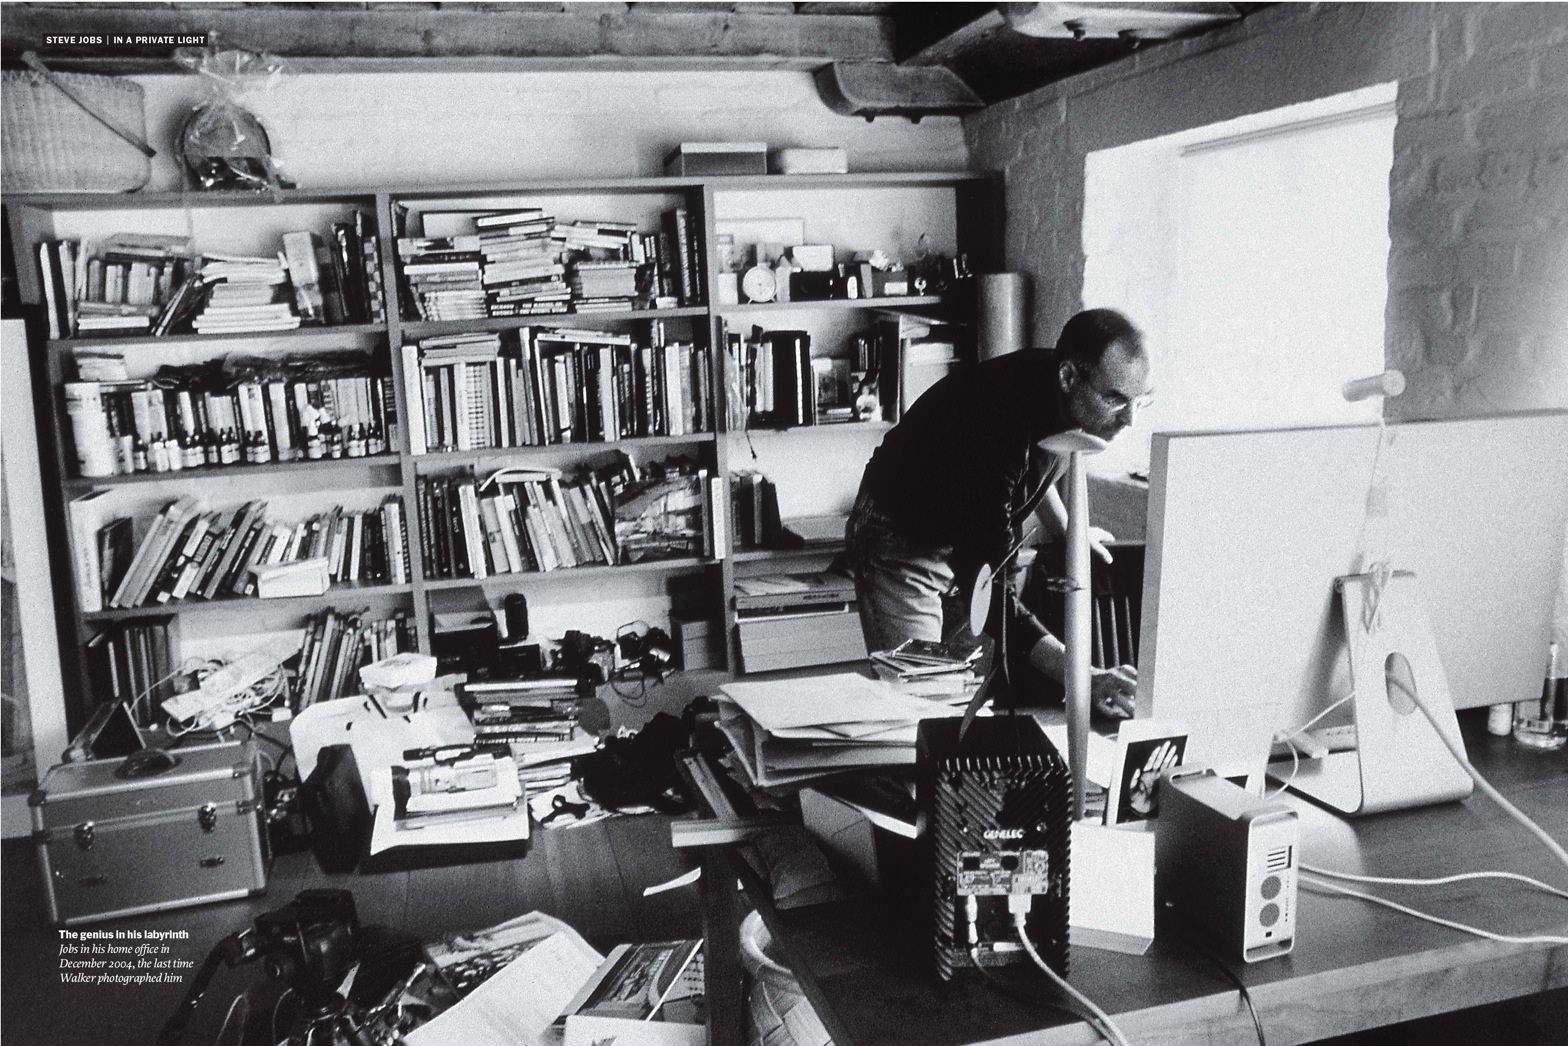 Jobs in his home office. No public photos have surfaced of his office at Apple's headquarters in Cupertino. Photo: Diana Walker